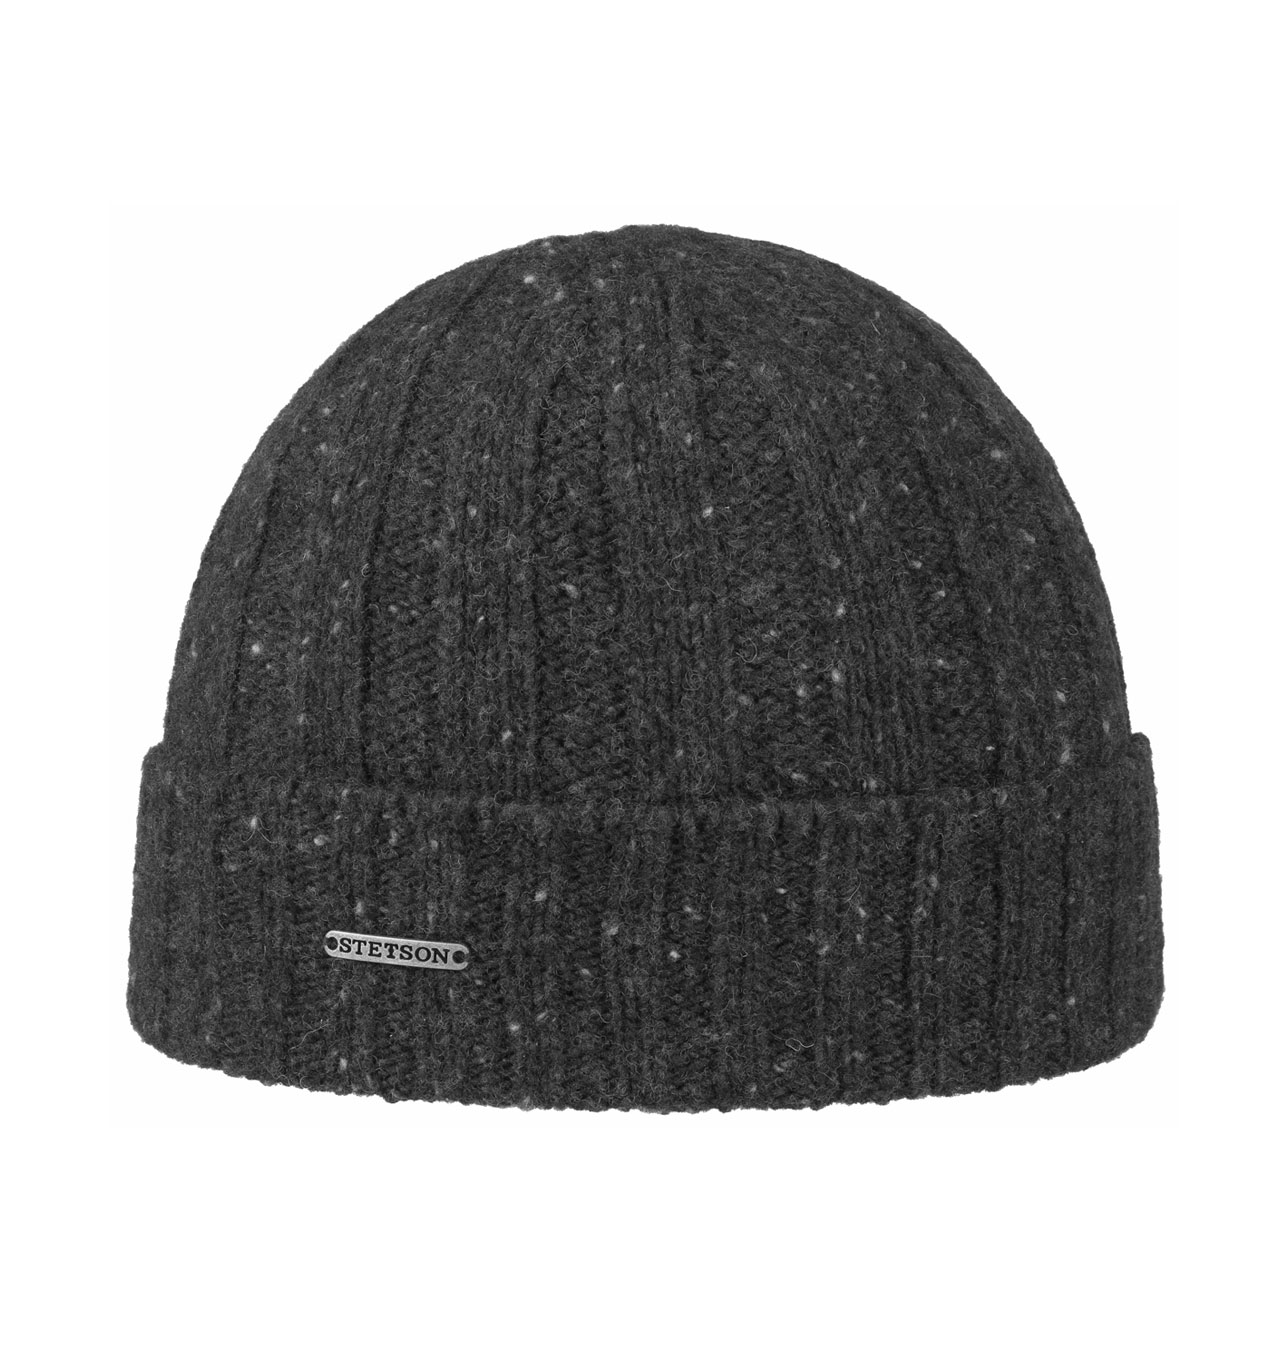 Stetson---Wisconsin-Donegal-Knit-Beanie---Anthracite